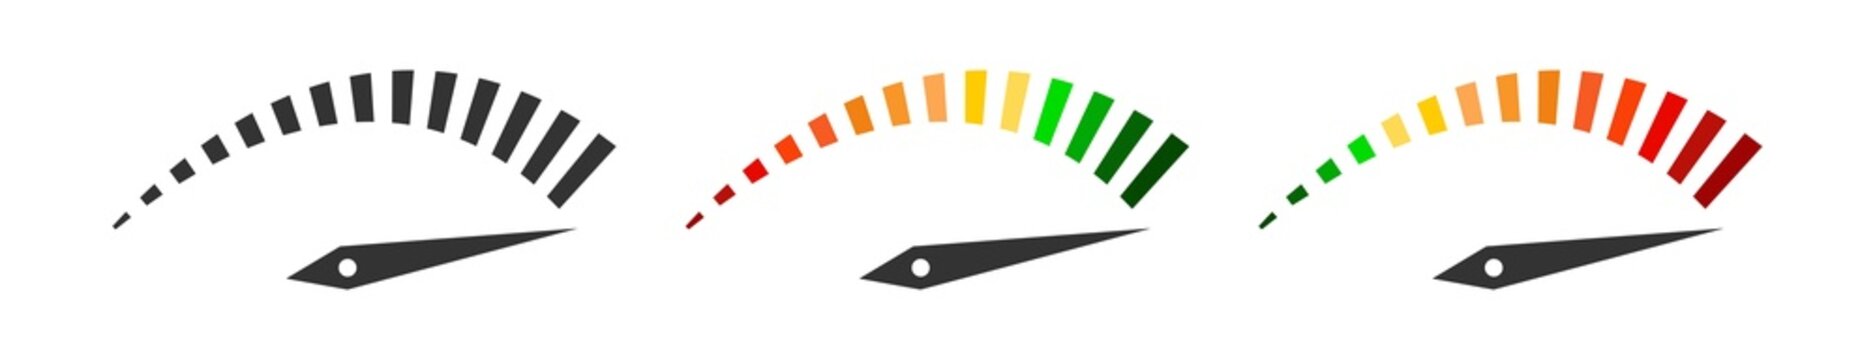 Performance measurement icon. Color tachometer symbol. Sign accelerate speed vector.